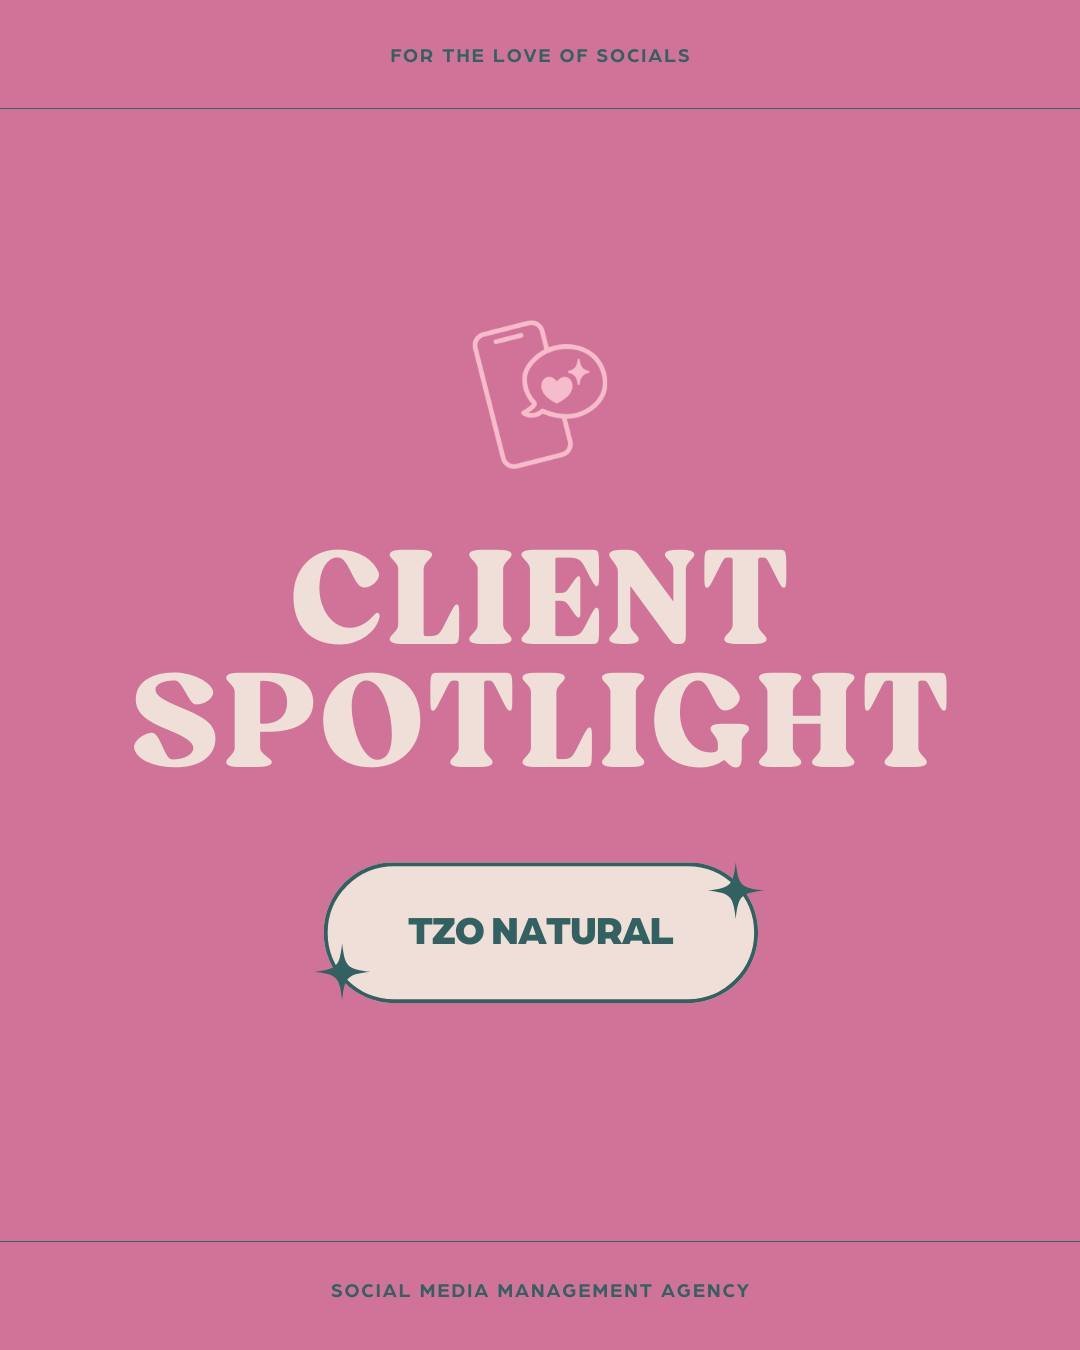 One of the main things we LOVE about our work at FTLOS is the diverse range of clients we get the opportunity to collaborate with!

We have been reminiscing on past client projects lately and thought we would shine the client spotlight on Tzo, an all